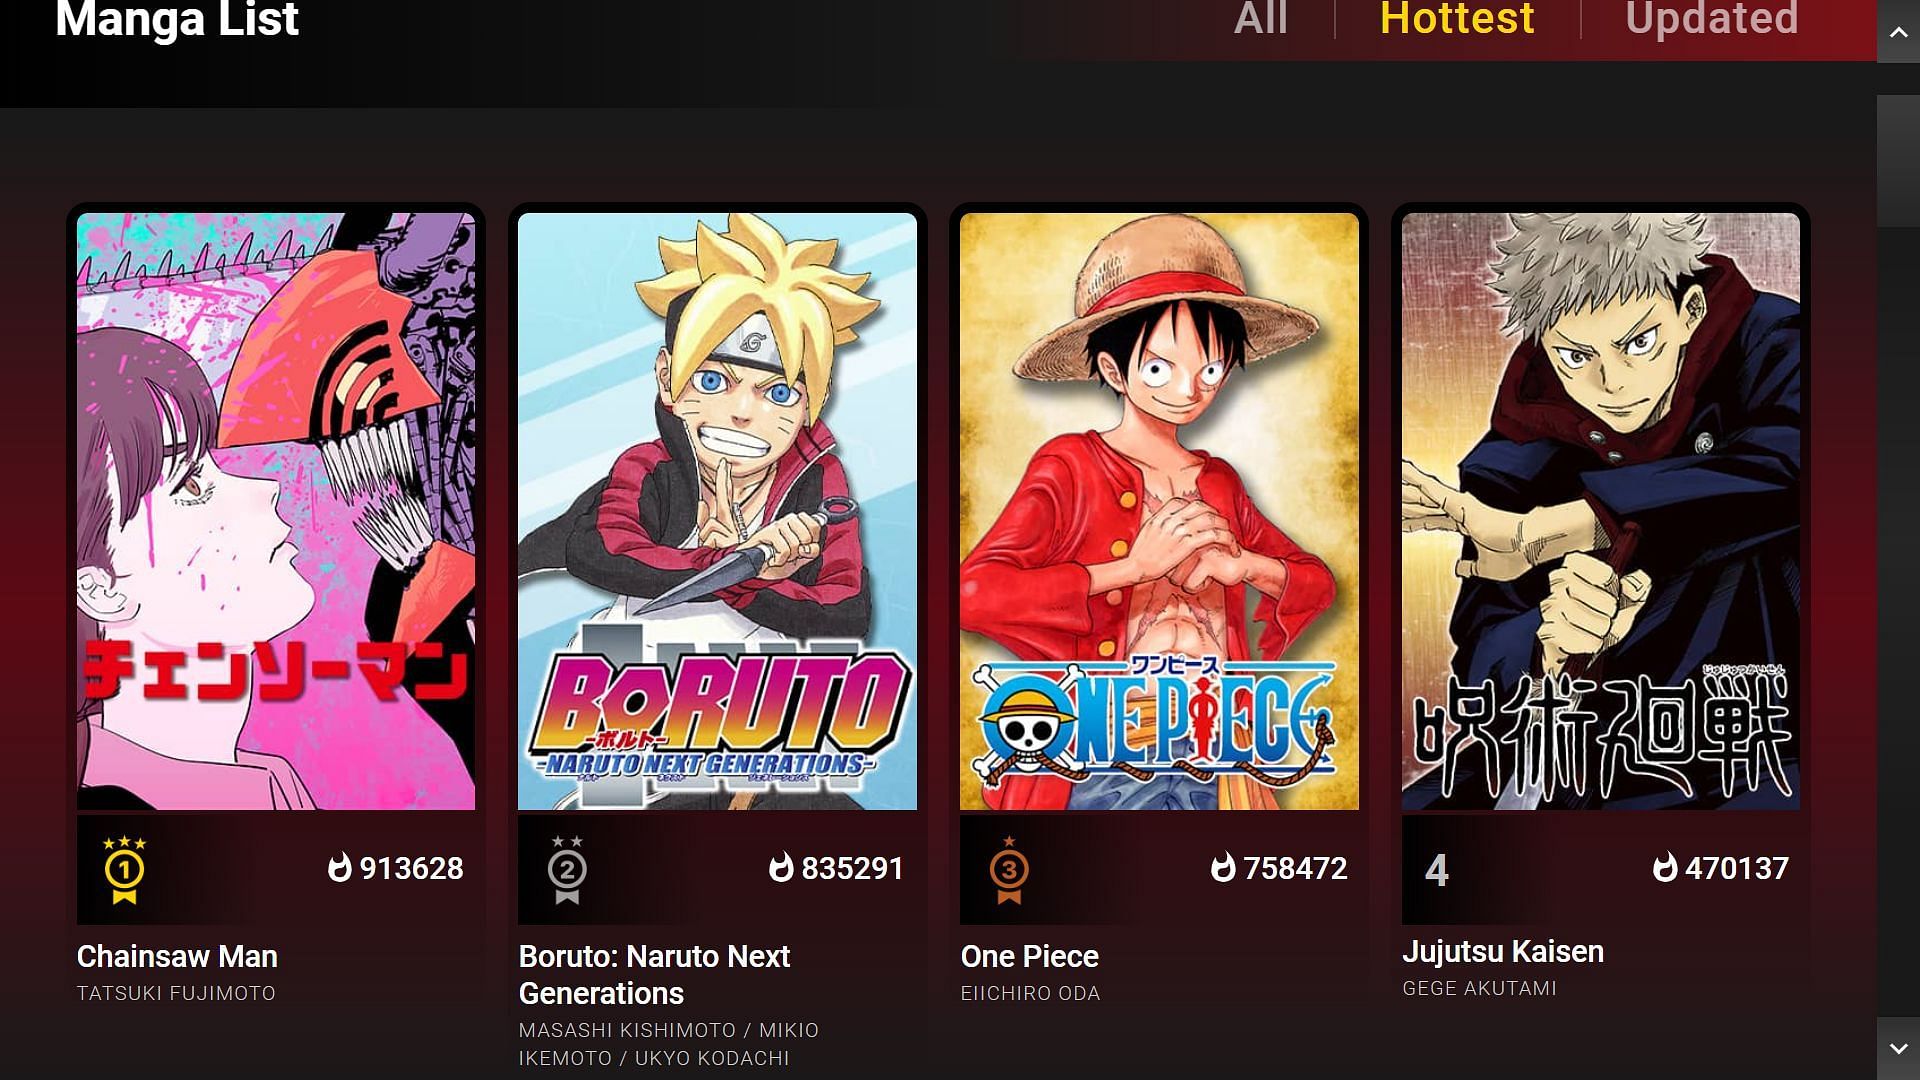 boruto manga has crossed 700k views on manga plus, only behind op and  chainsaw man, and its the only one with a monthly schedule : r/Boruto